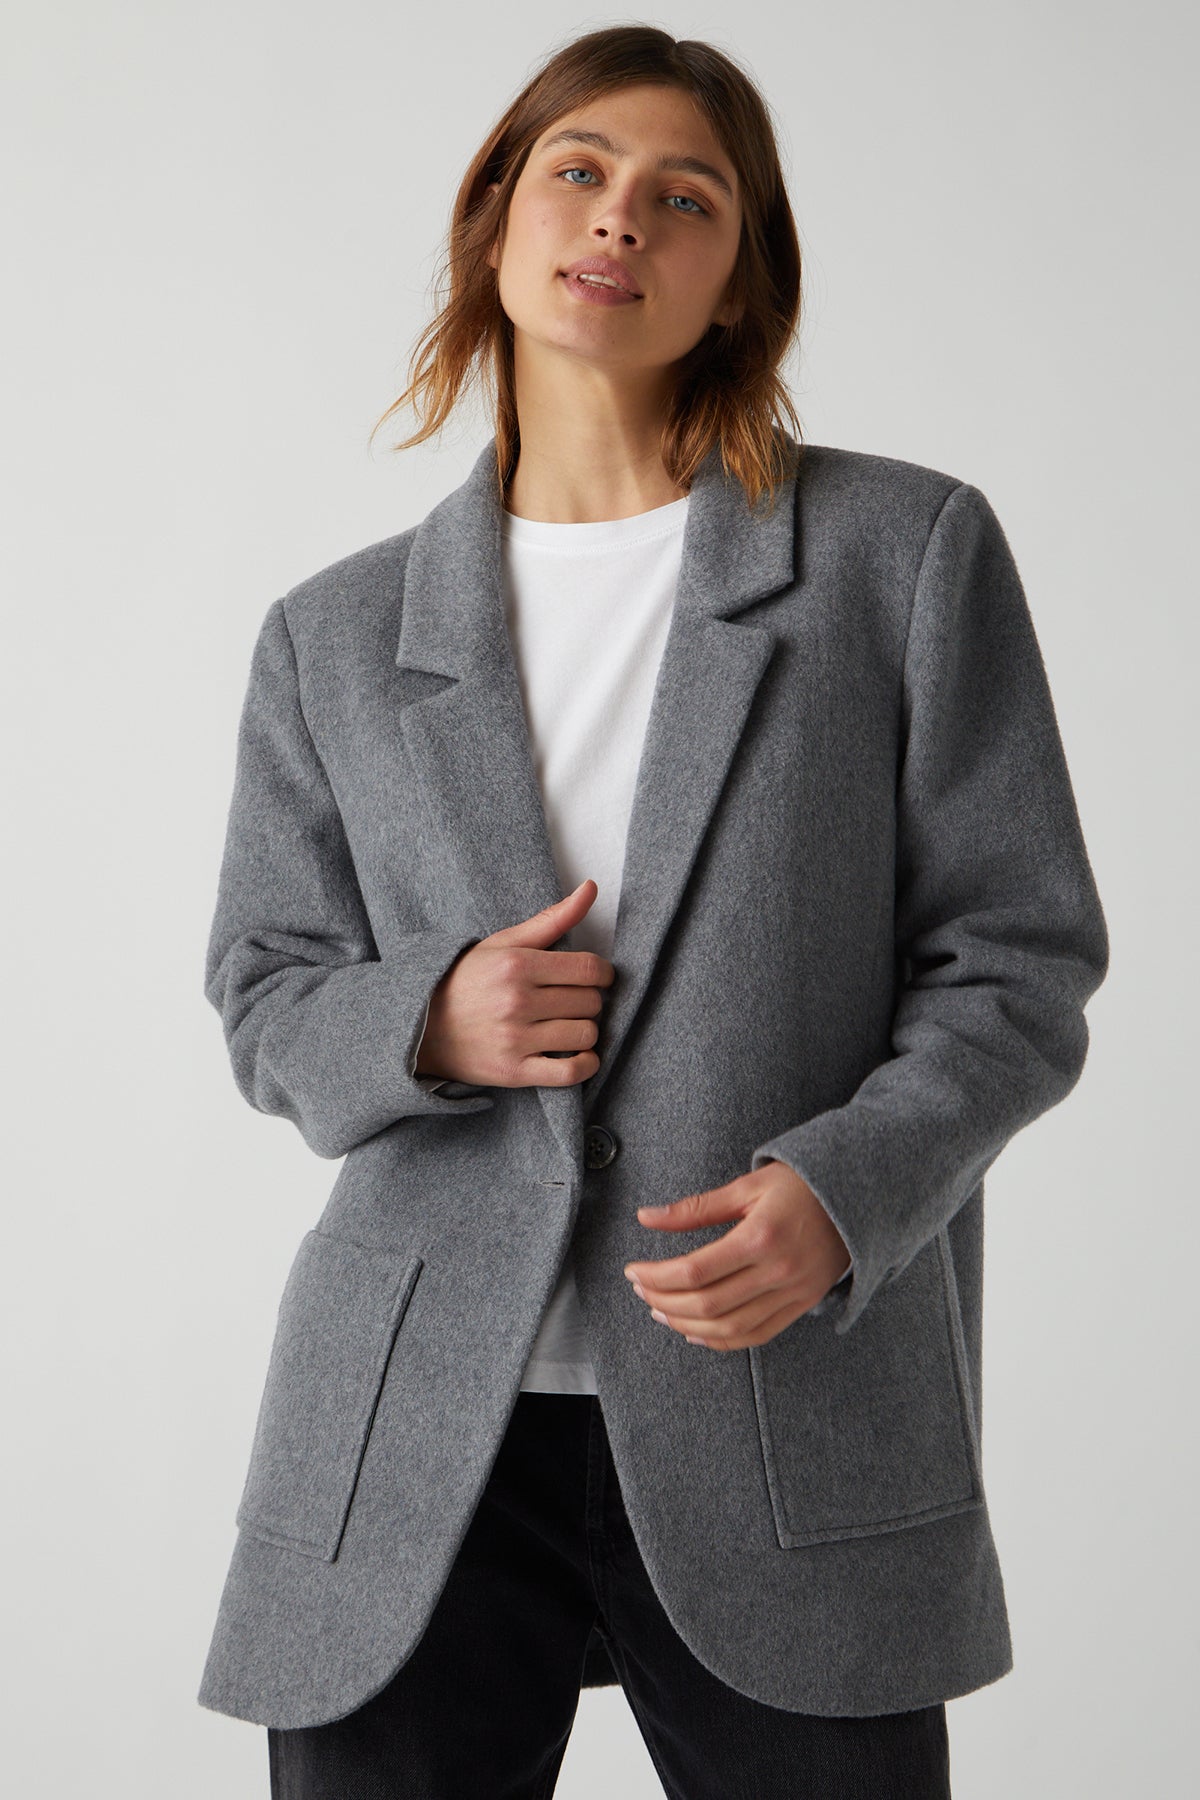 The model is wearing a grey wool ALAMOS BLAZER by Velvet by Jenny Graham.-25483350016193